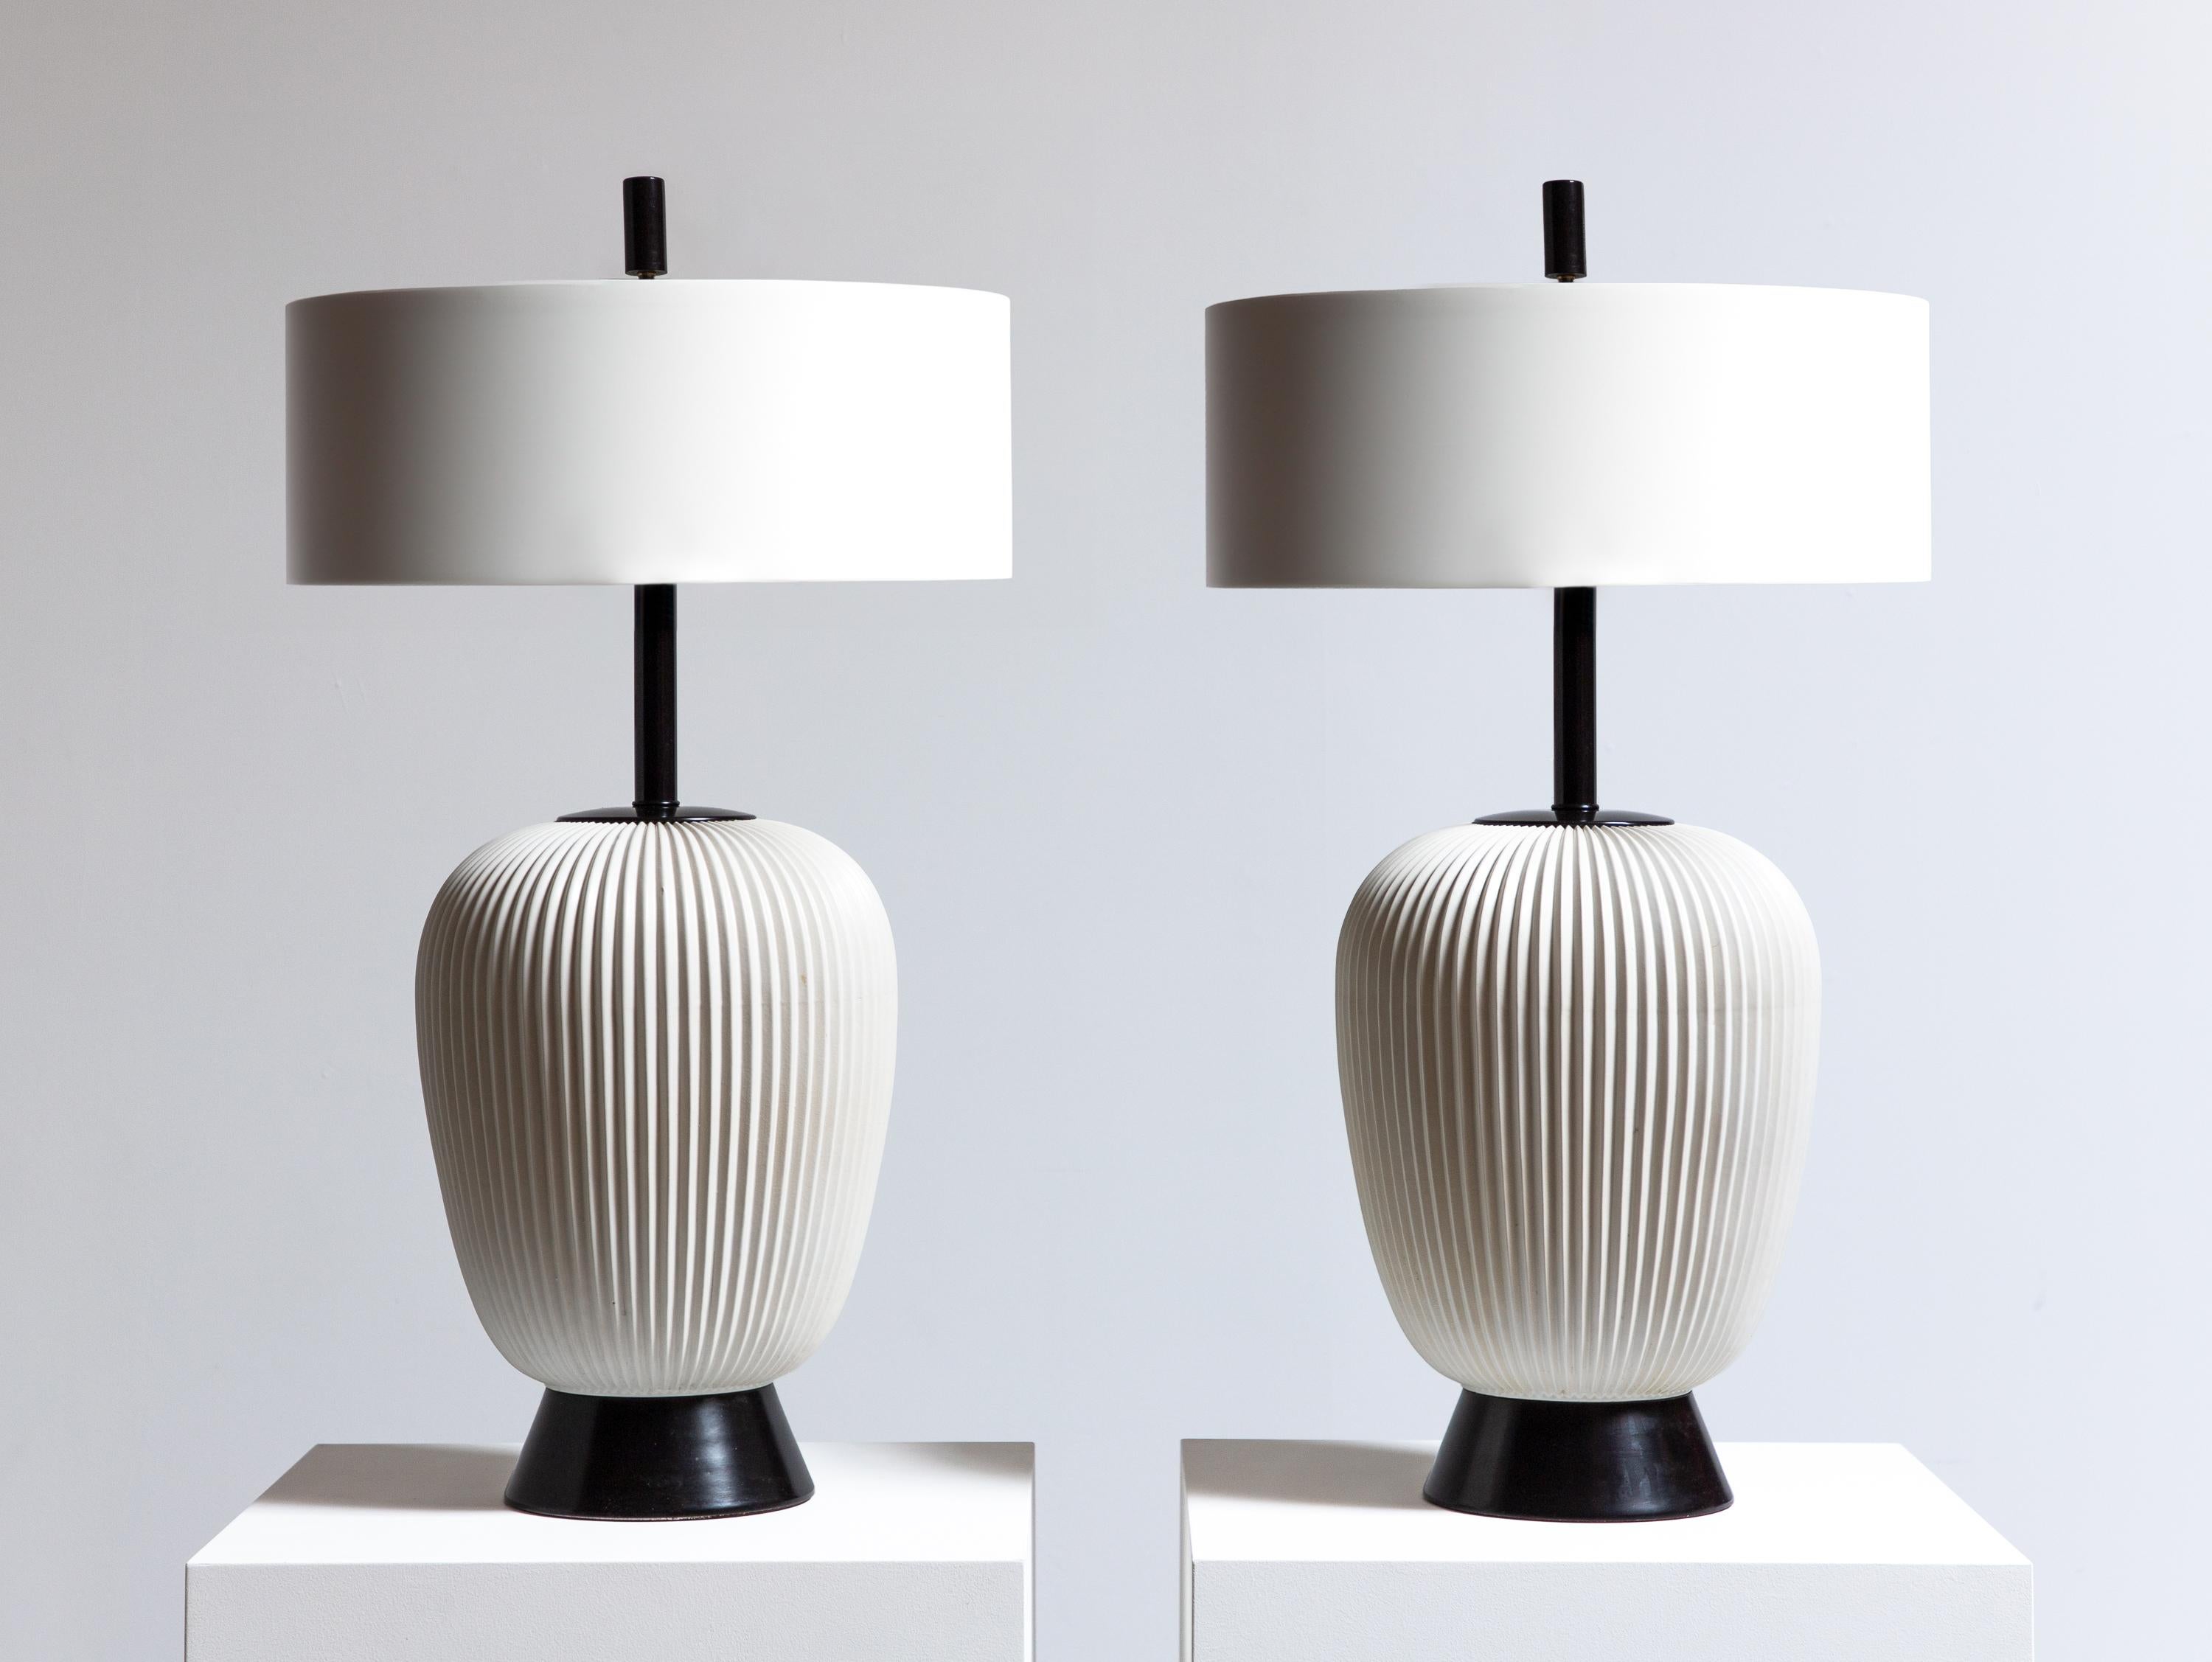 Pair of ceramic table lamps, designed by Gerald Thurston for Lightolier. Executed in a minimal black and white, this fresh design has a ribbed motif that adds texture to these large scale lamps. Finished with sleek black enameled metal accents,